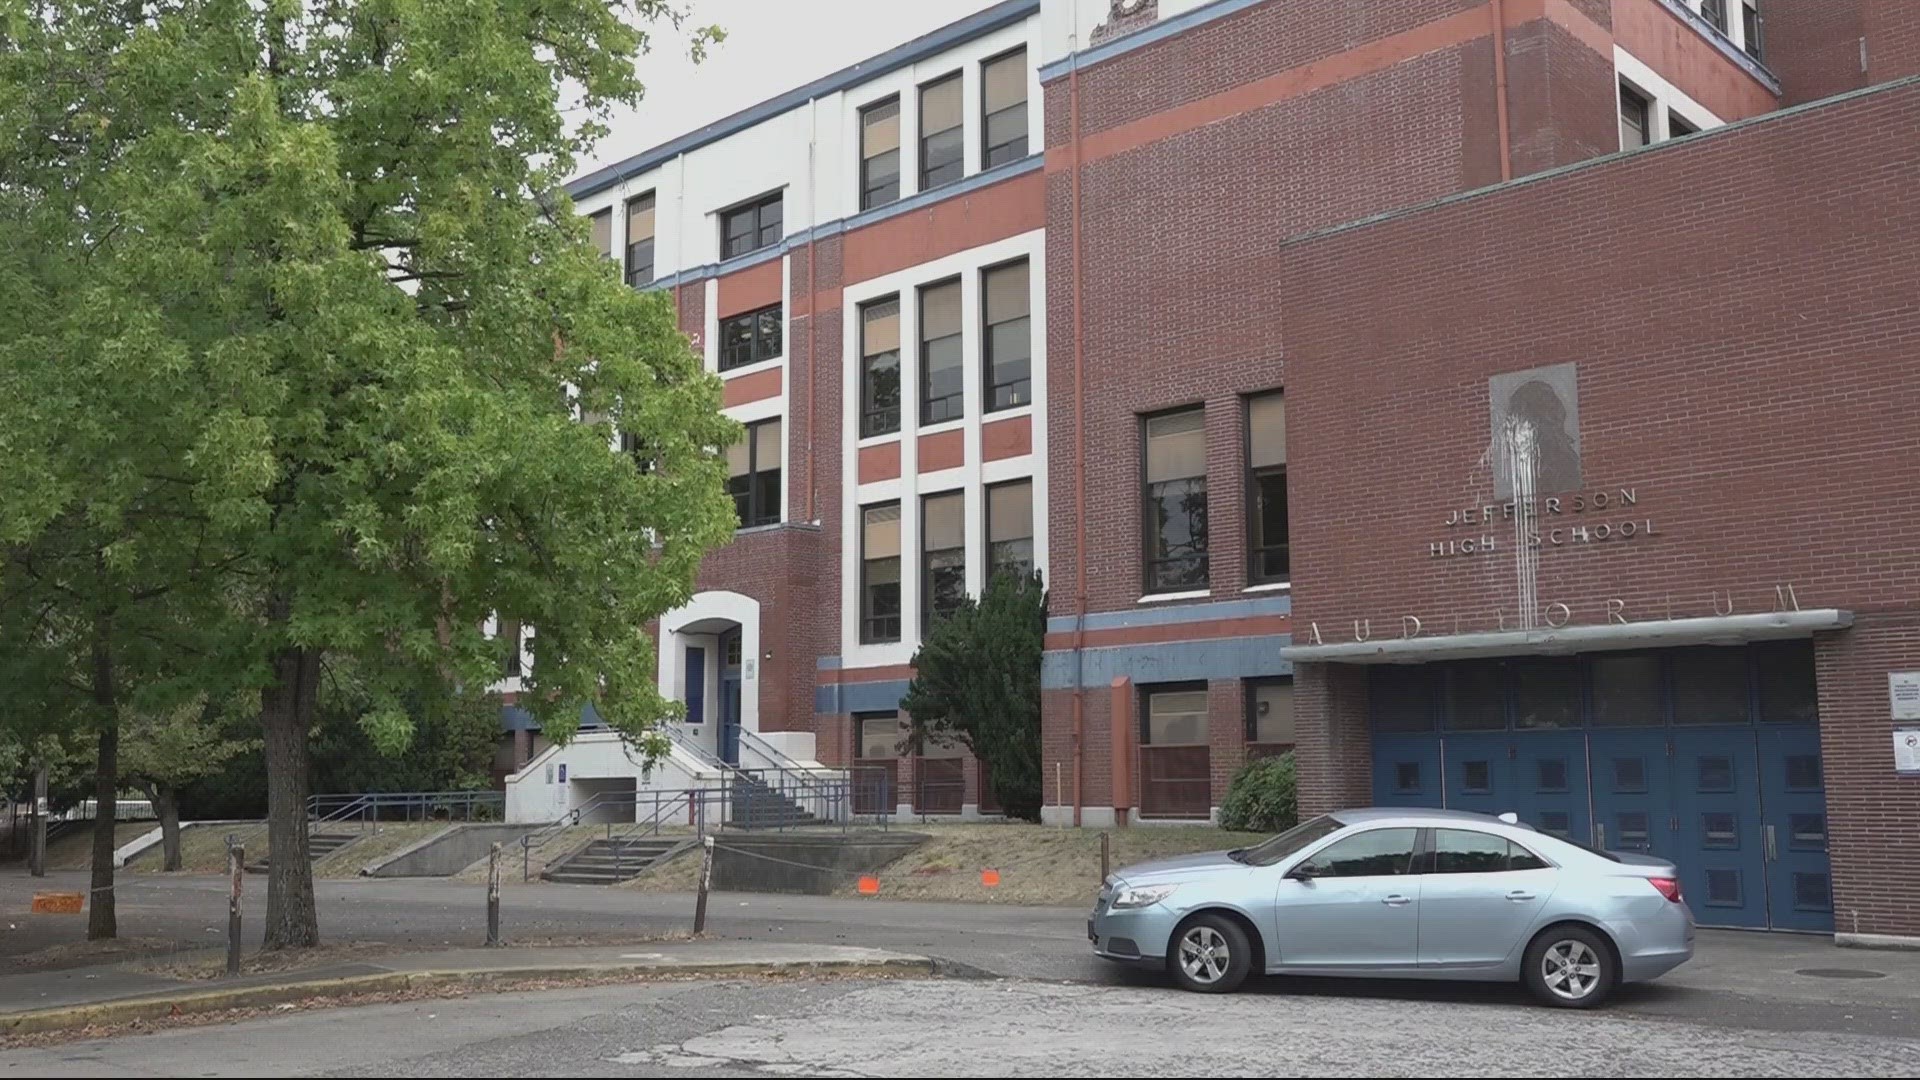 The plan is for Jefferson students to attend class at Marshall High School, 11 miles away, while it undergoes a three-year renovation project.